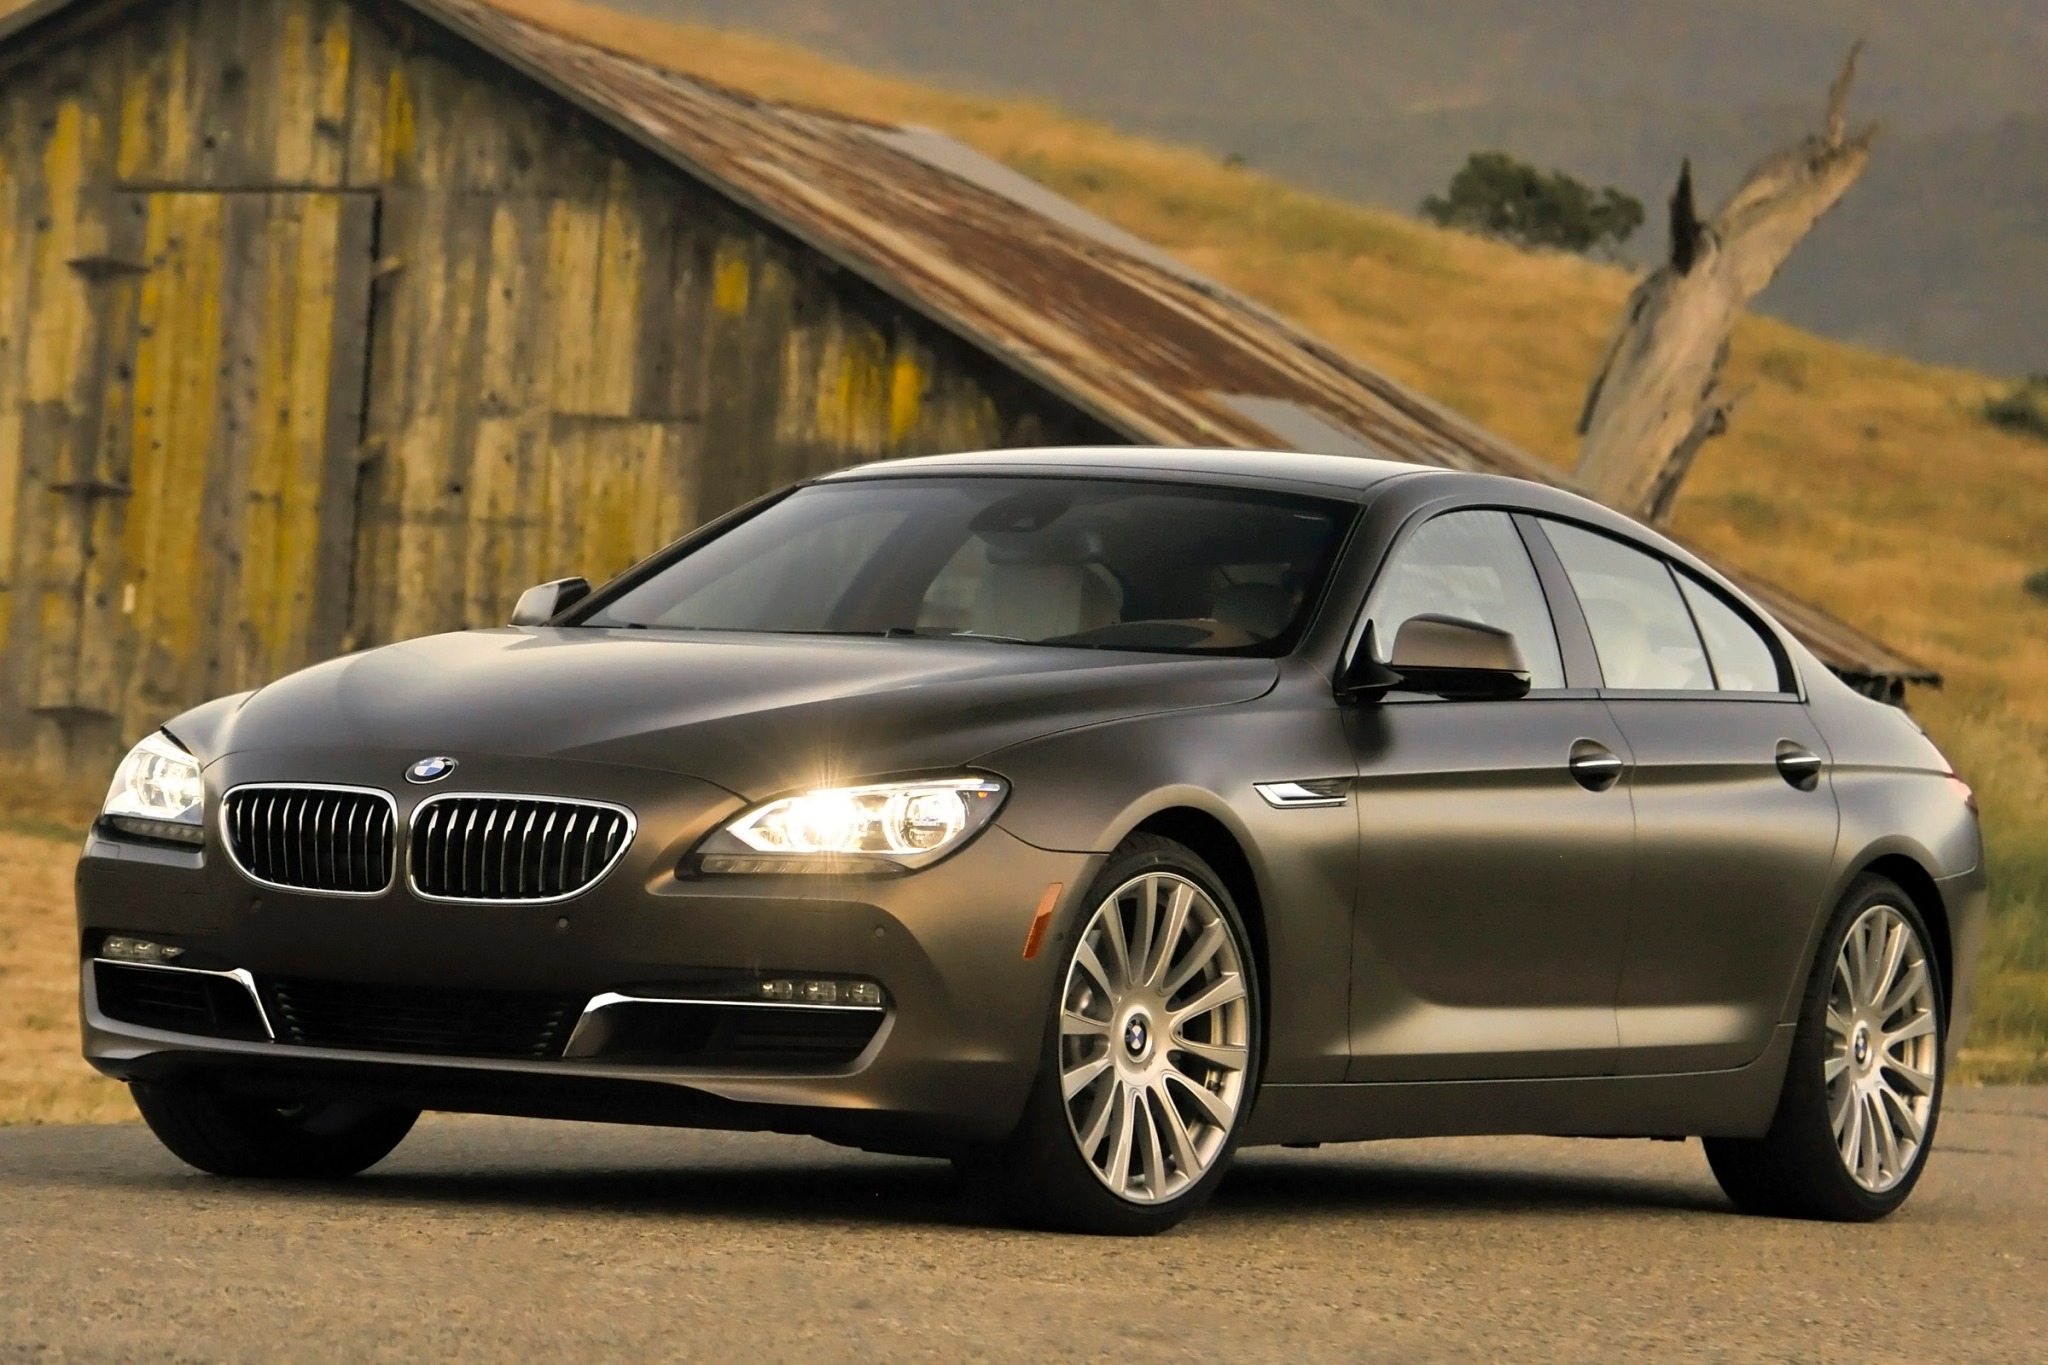 2015 BMW 6Series Gran Coupe VIN Number Search AutoDetective